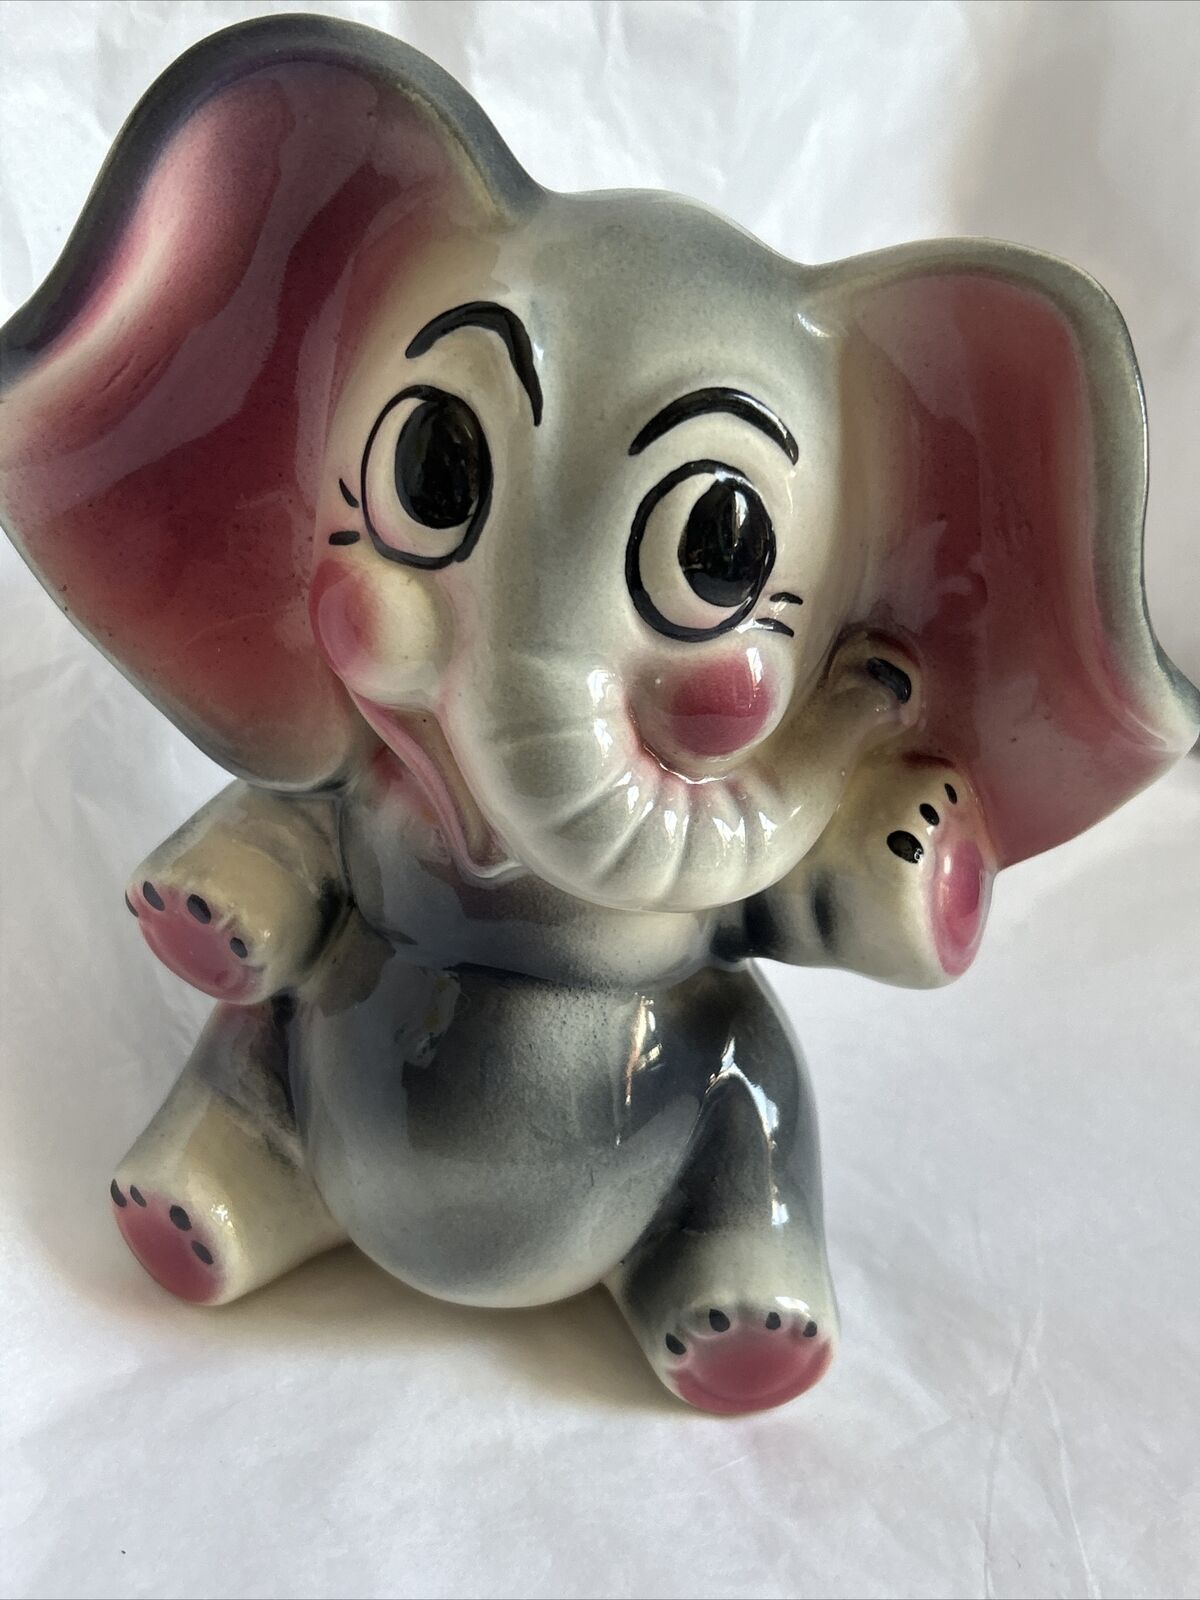 Vintage Hand Made Ceramic ELEPHANT Bank c1970. Adorable. No Chips Has Stopper A+